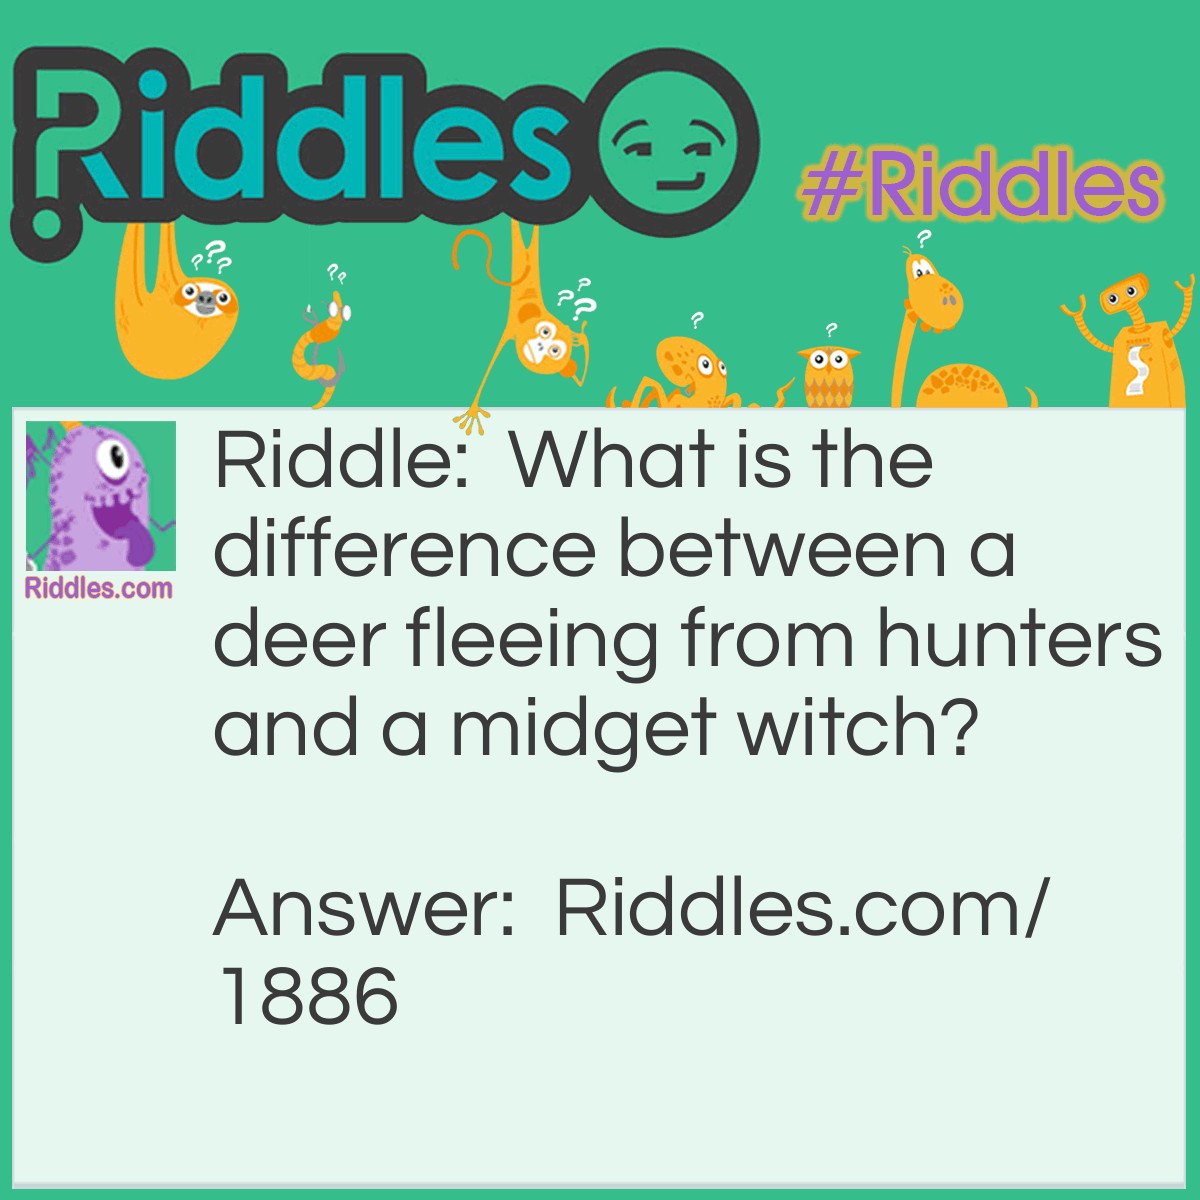 Riddle: What is the difference between a deer fleeing from hunters and a midget witch? Answer: One is a hunted stag and the other a stunted hag.